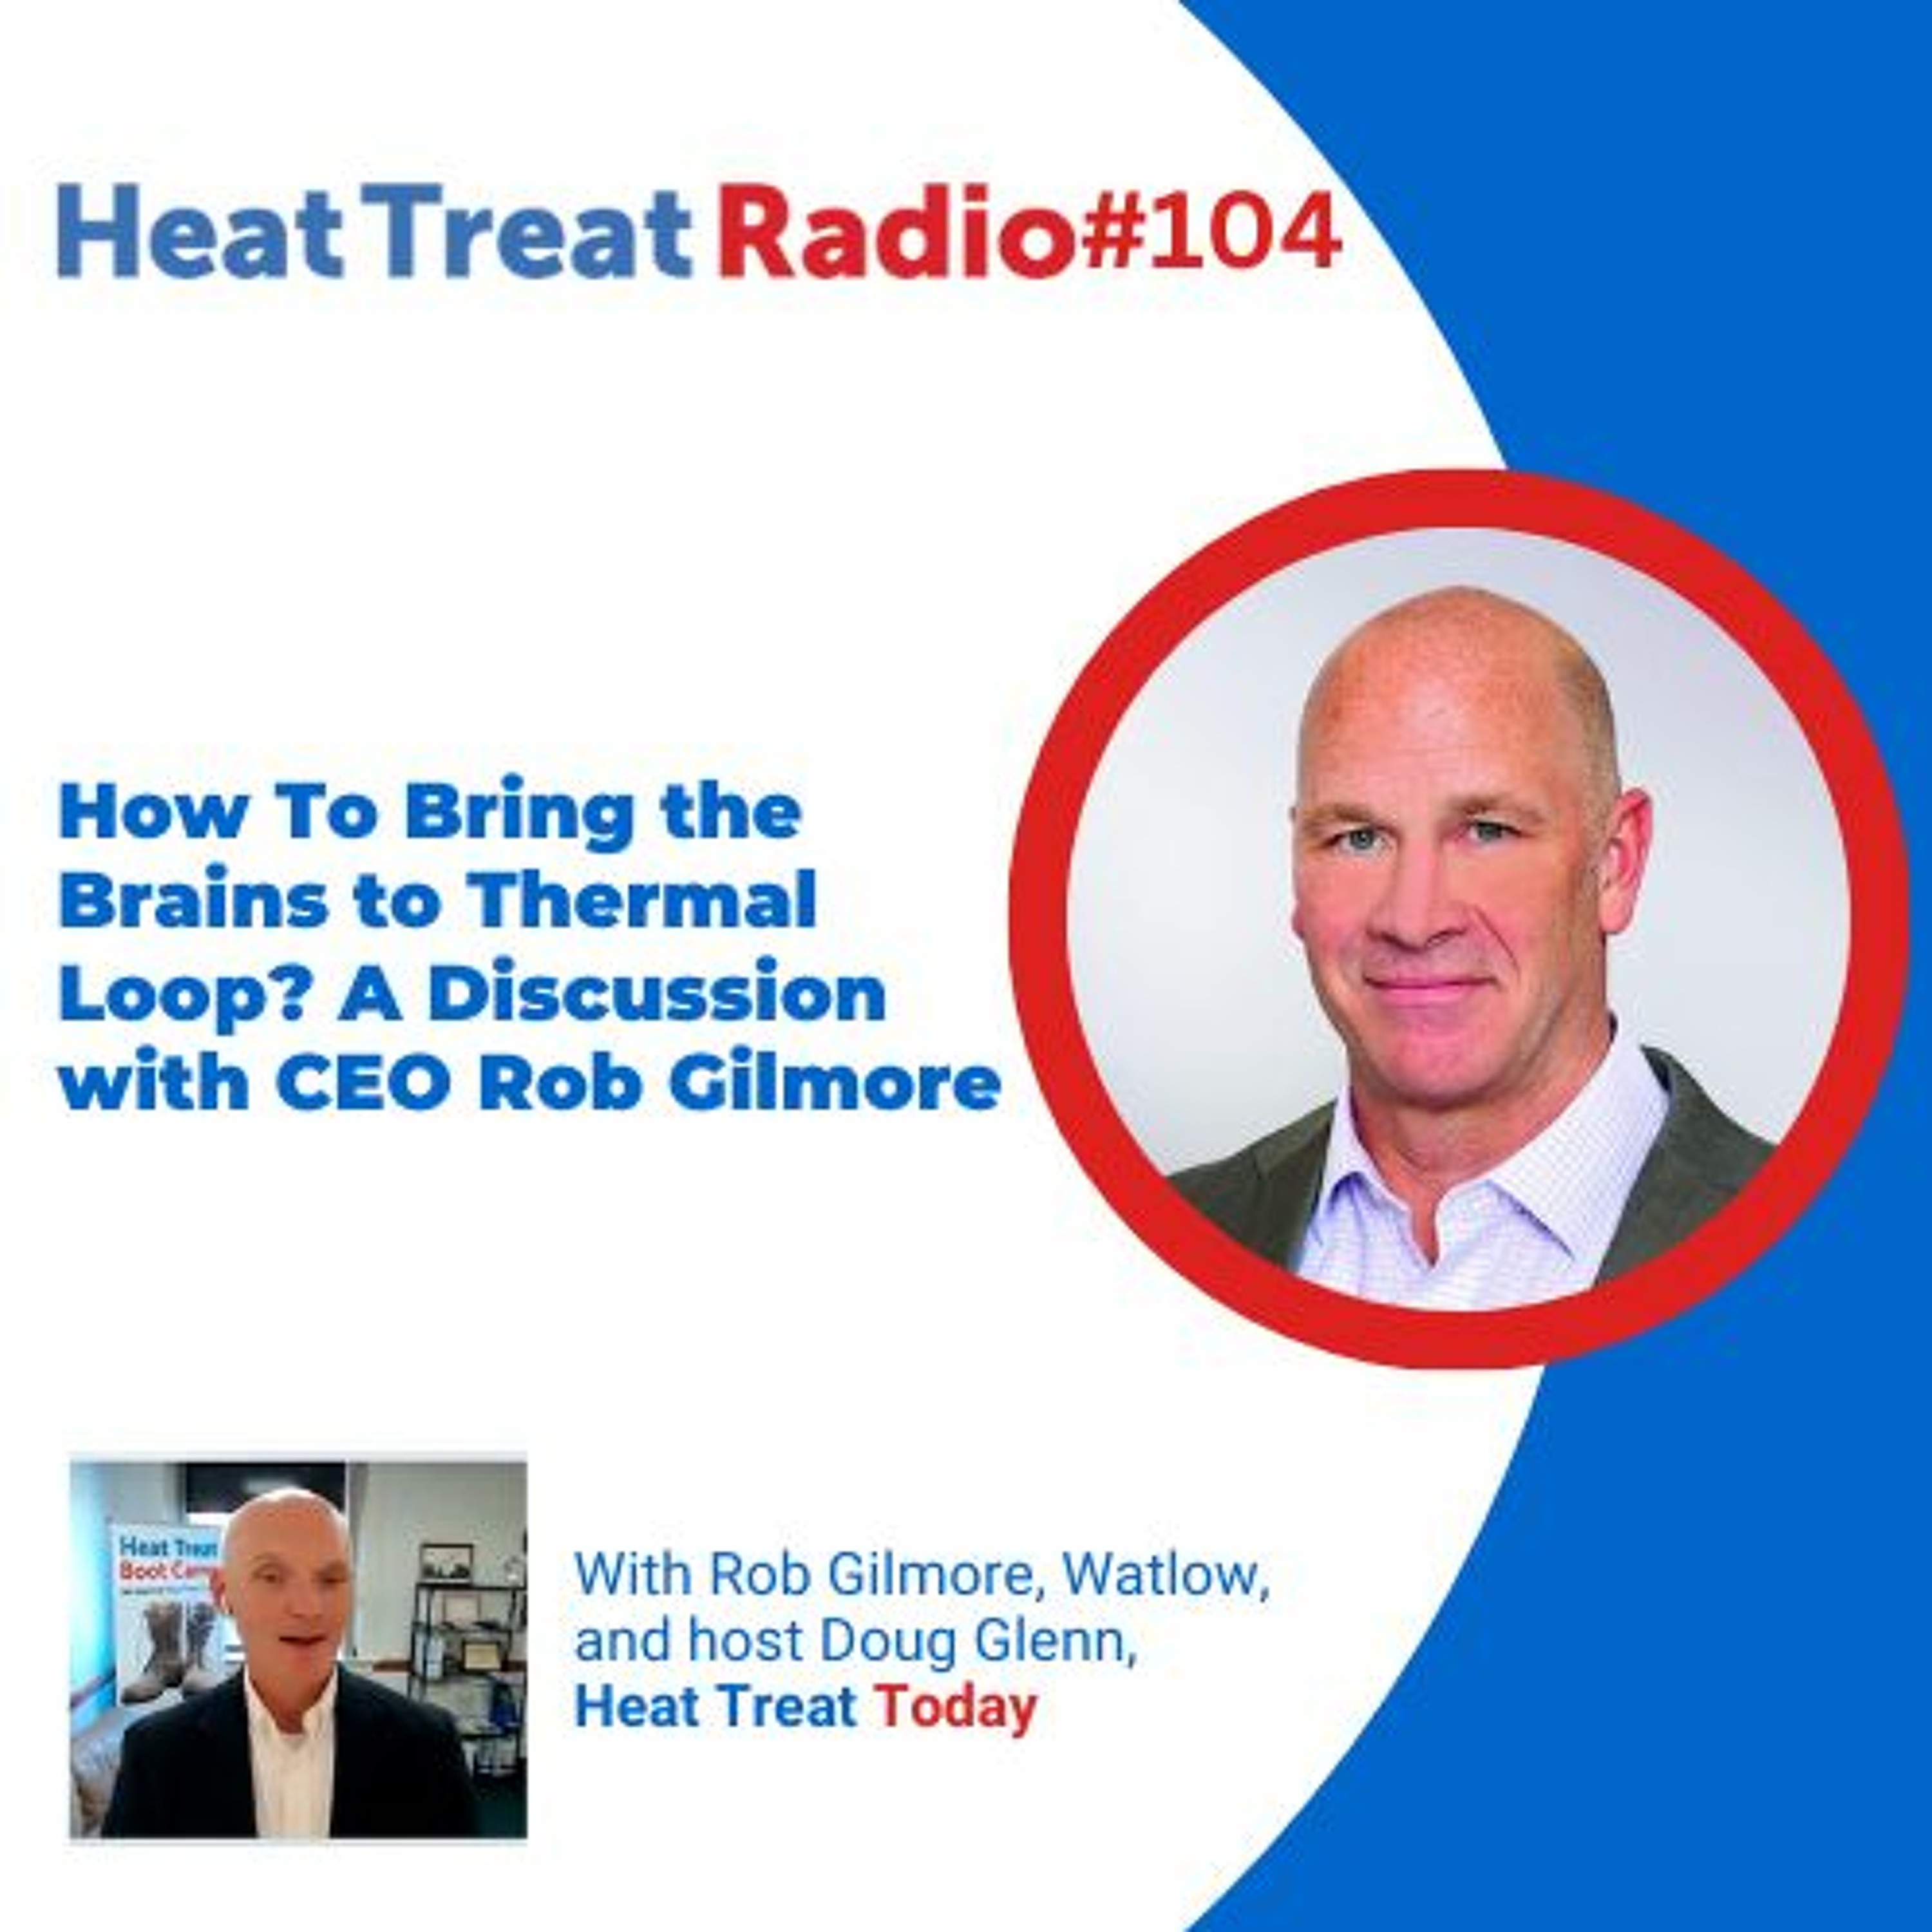 Heat Treat Radio #104: How To Bring the Brains to Thermal Loop? A Discussion with CEO Rob Gilmore